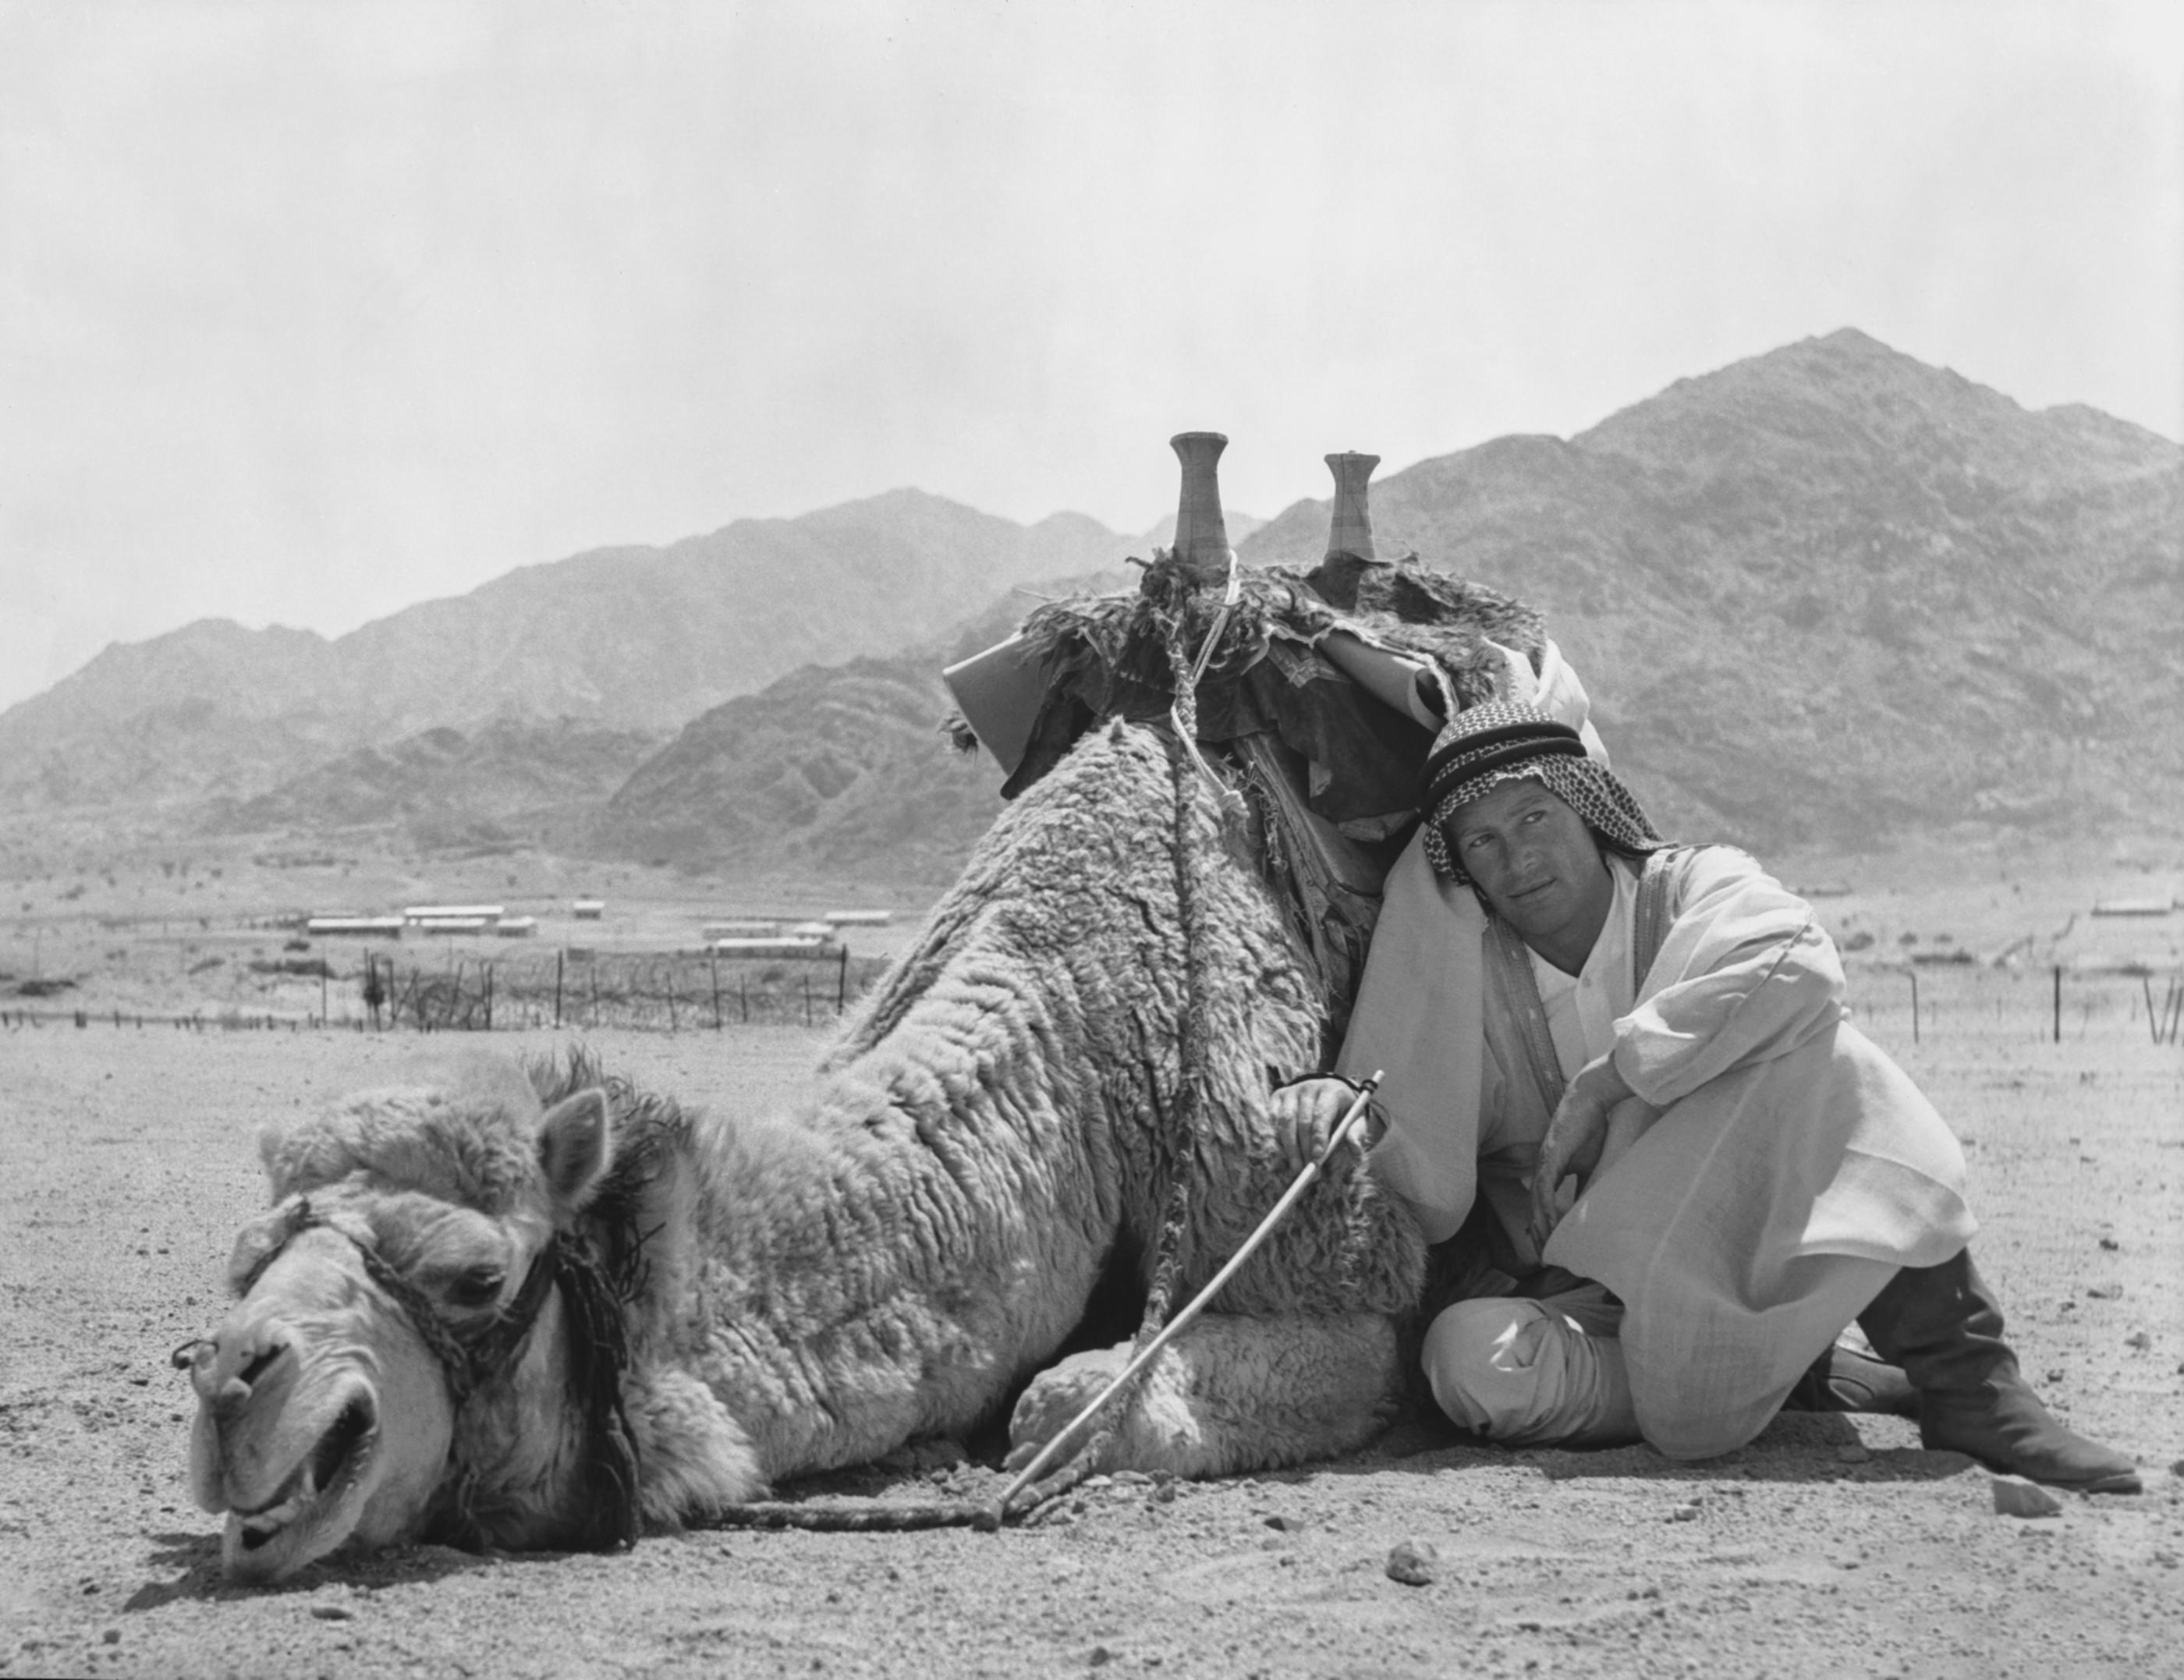 Unknown Black and White Photograph - Lawrence of Arabia Camel Scene